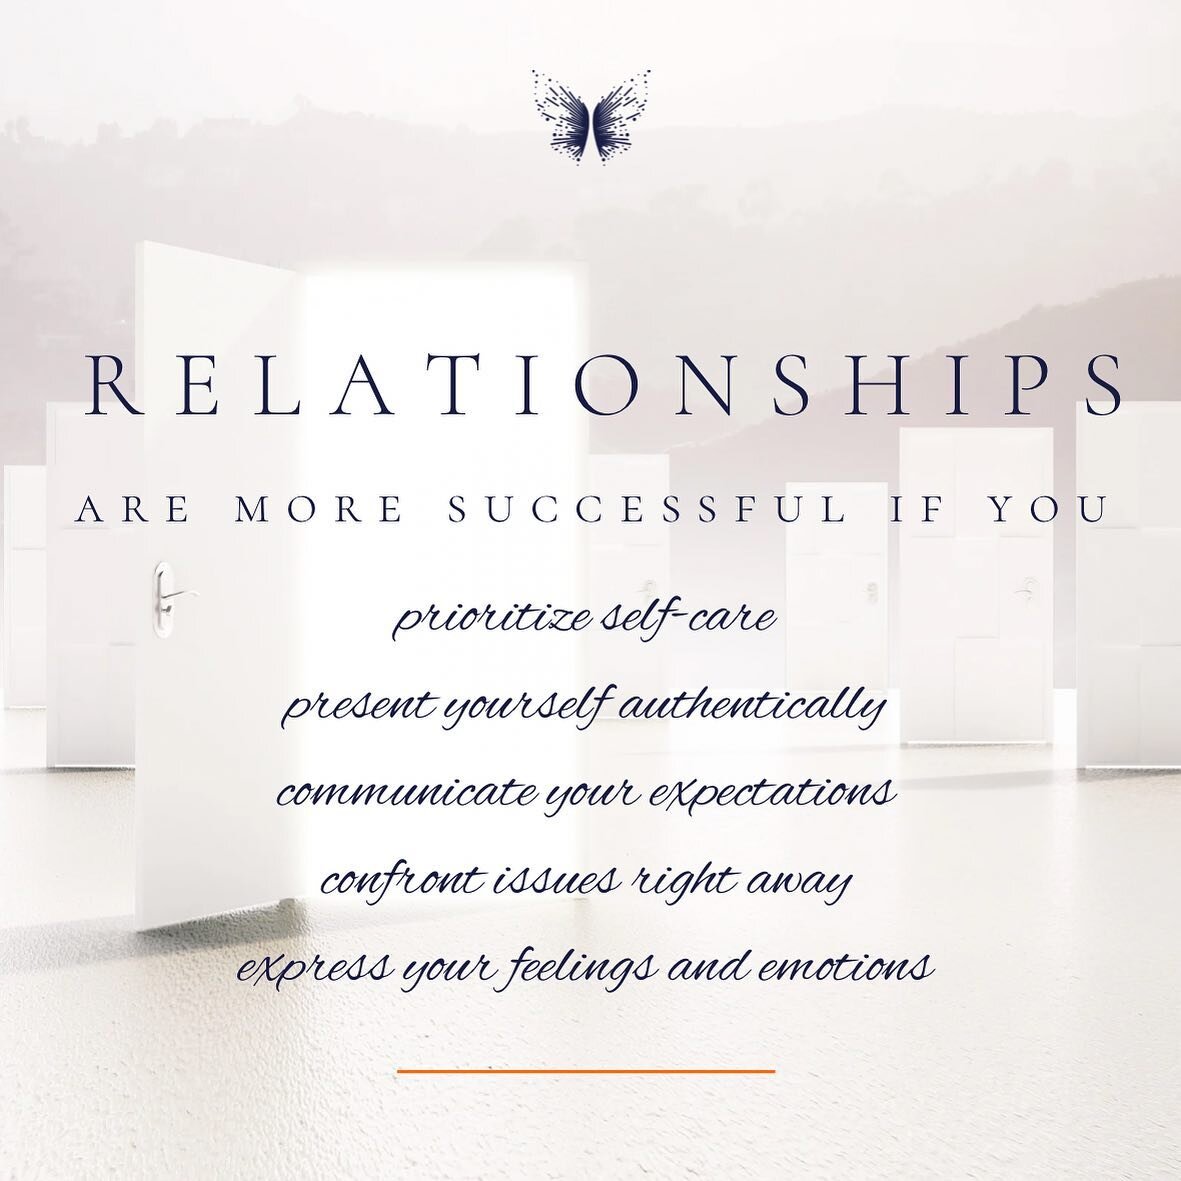 Beginnings are a pivotal time in relationships.